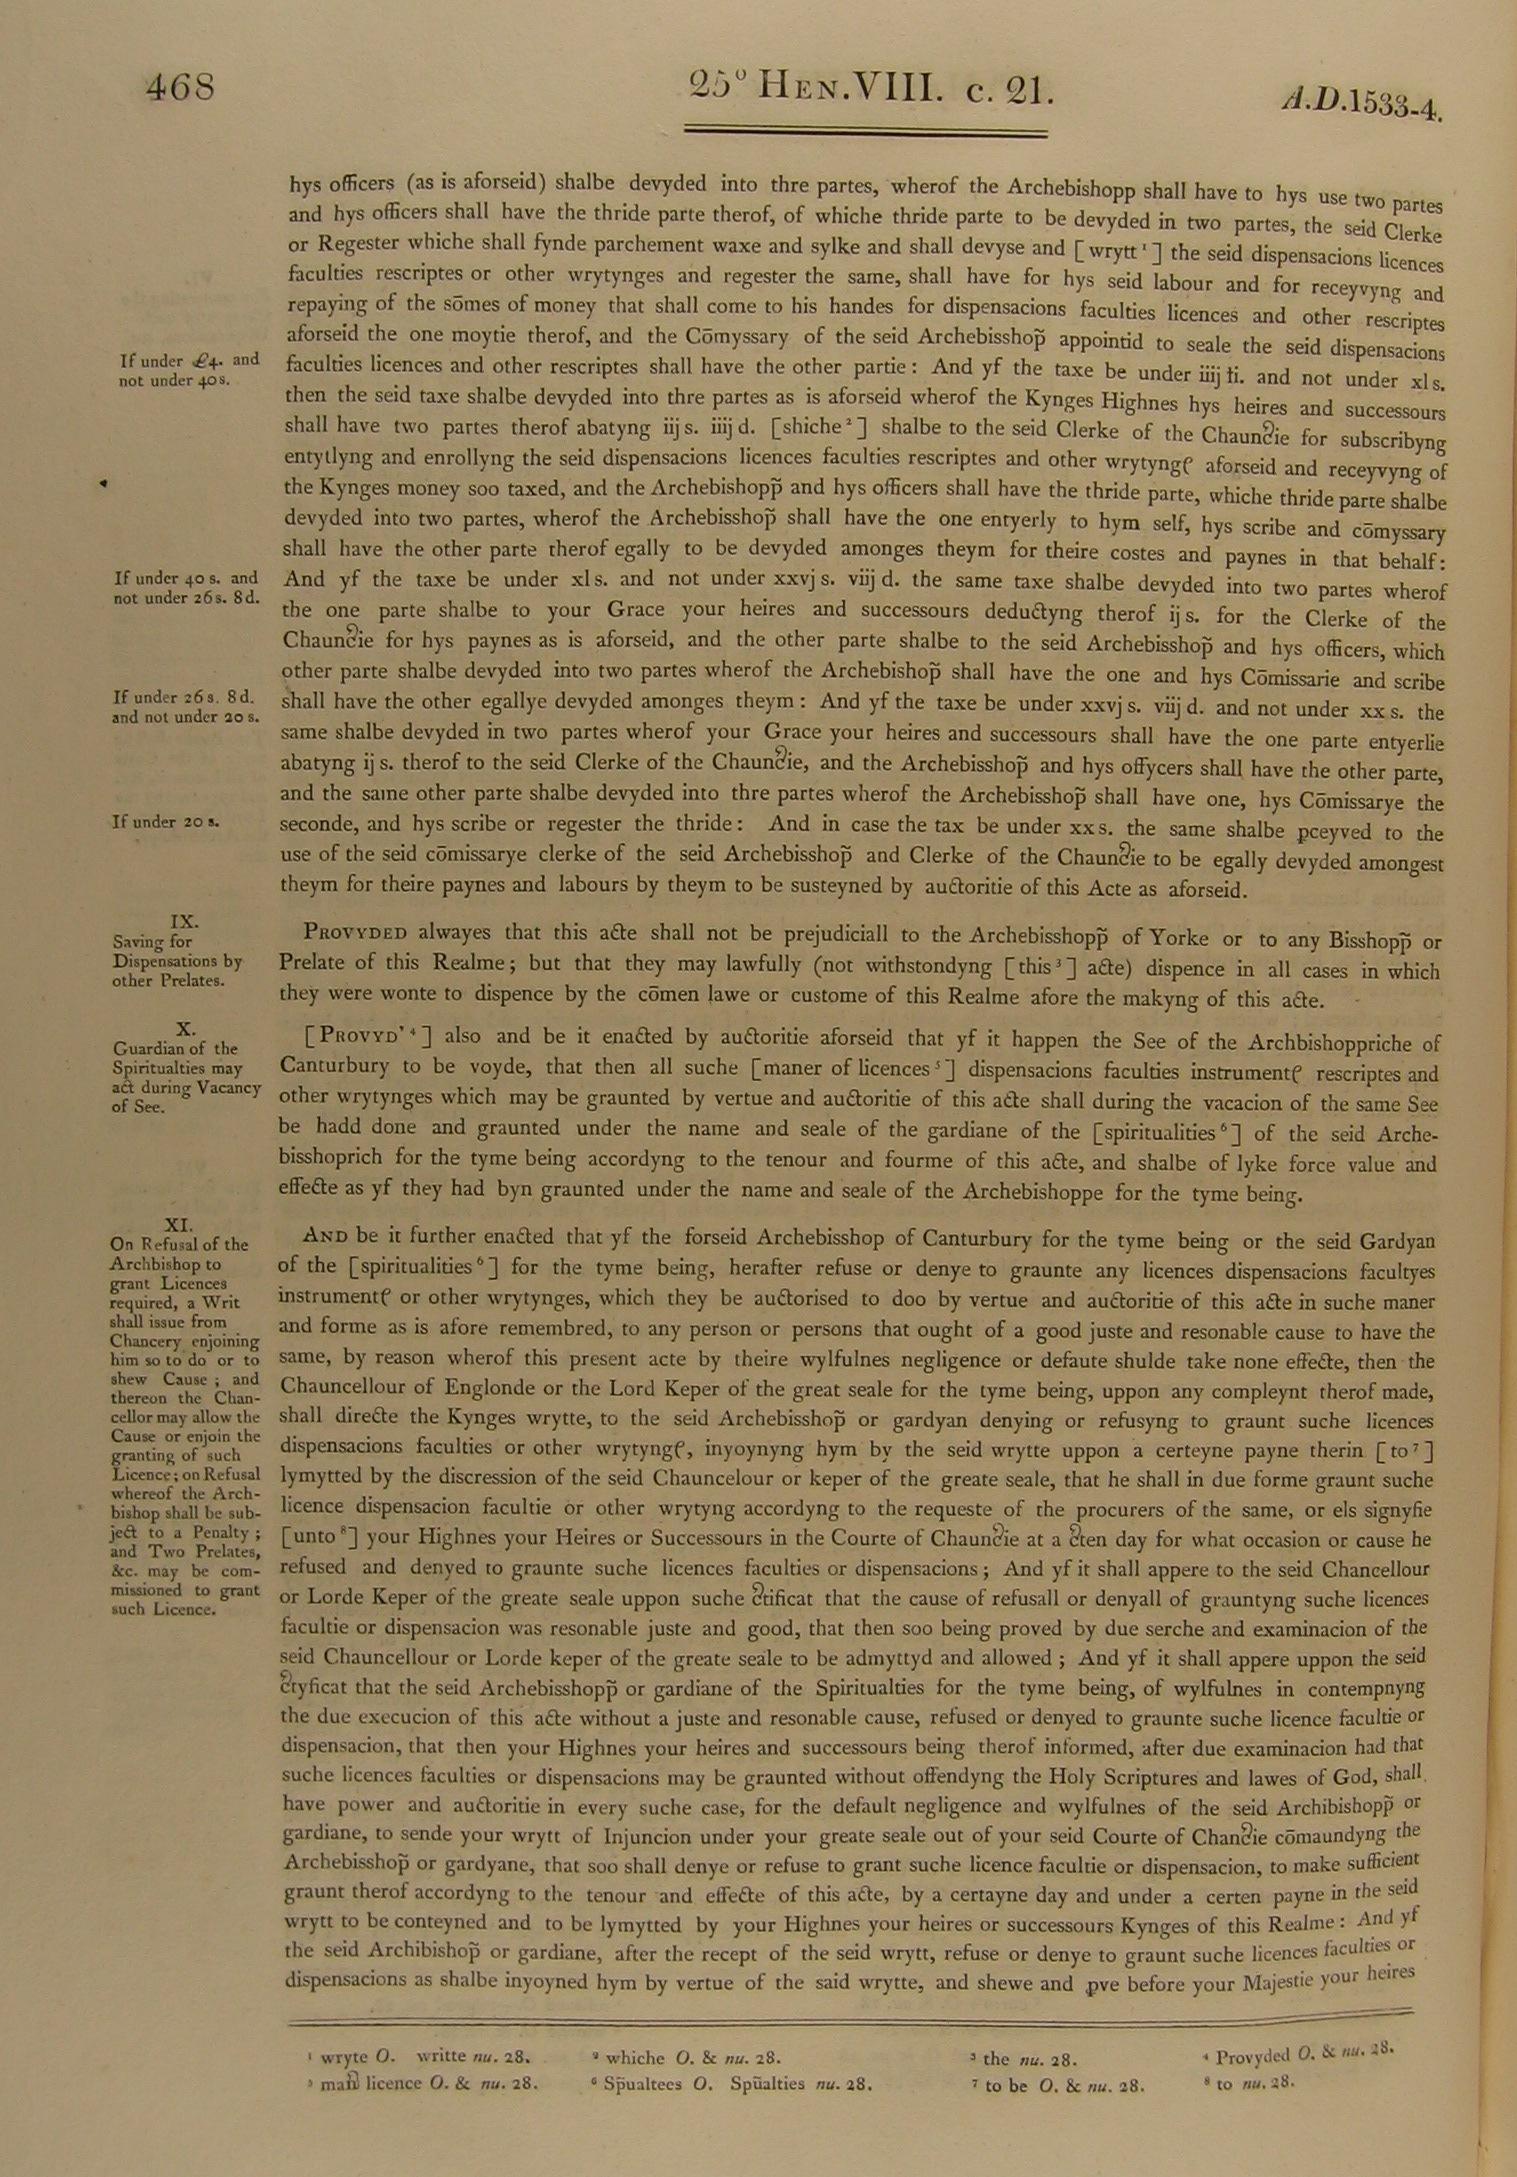 Image of 25 Henry VIII, c. 21 (page 5 of 8). Click for larger image.